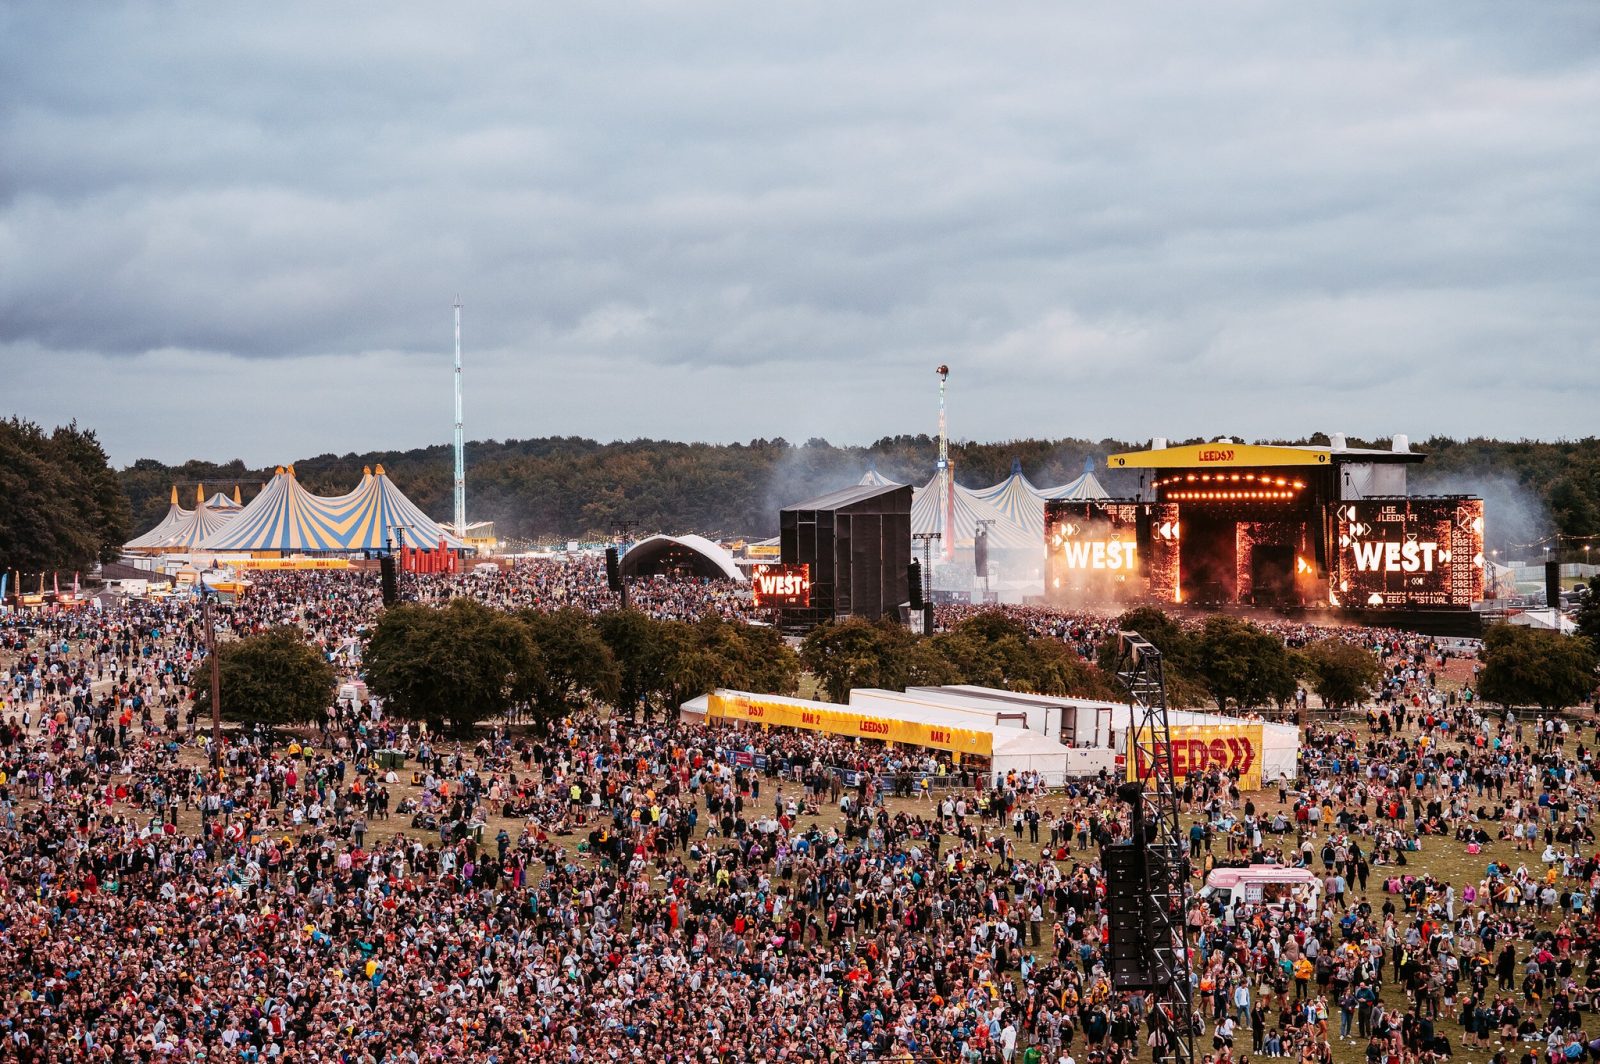 One of the stages at Leeds Festival. 